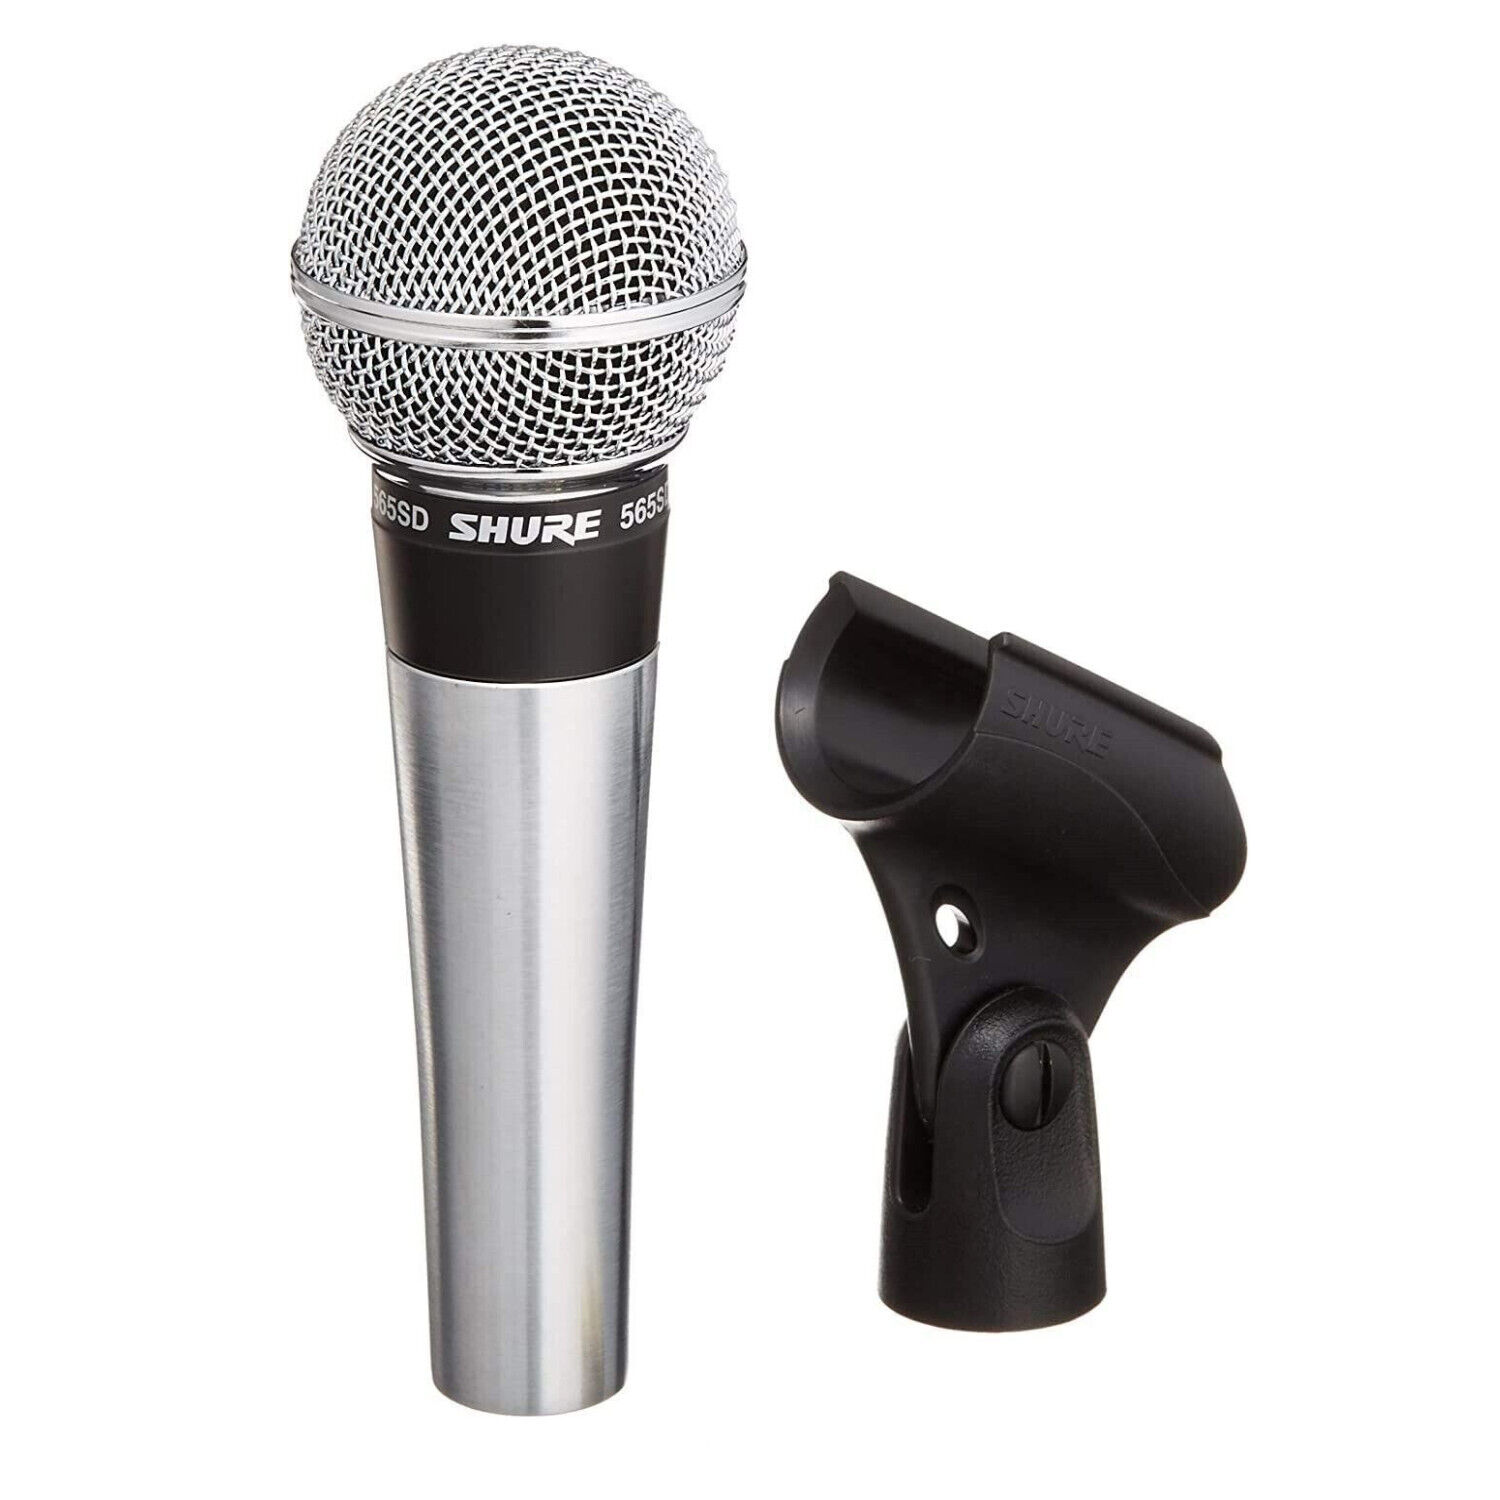 Shure 565SD Cardioid Dynamic Vocal / Broadcast Microphone